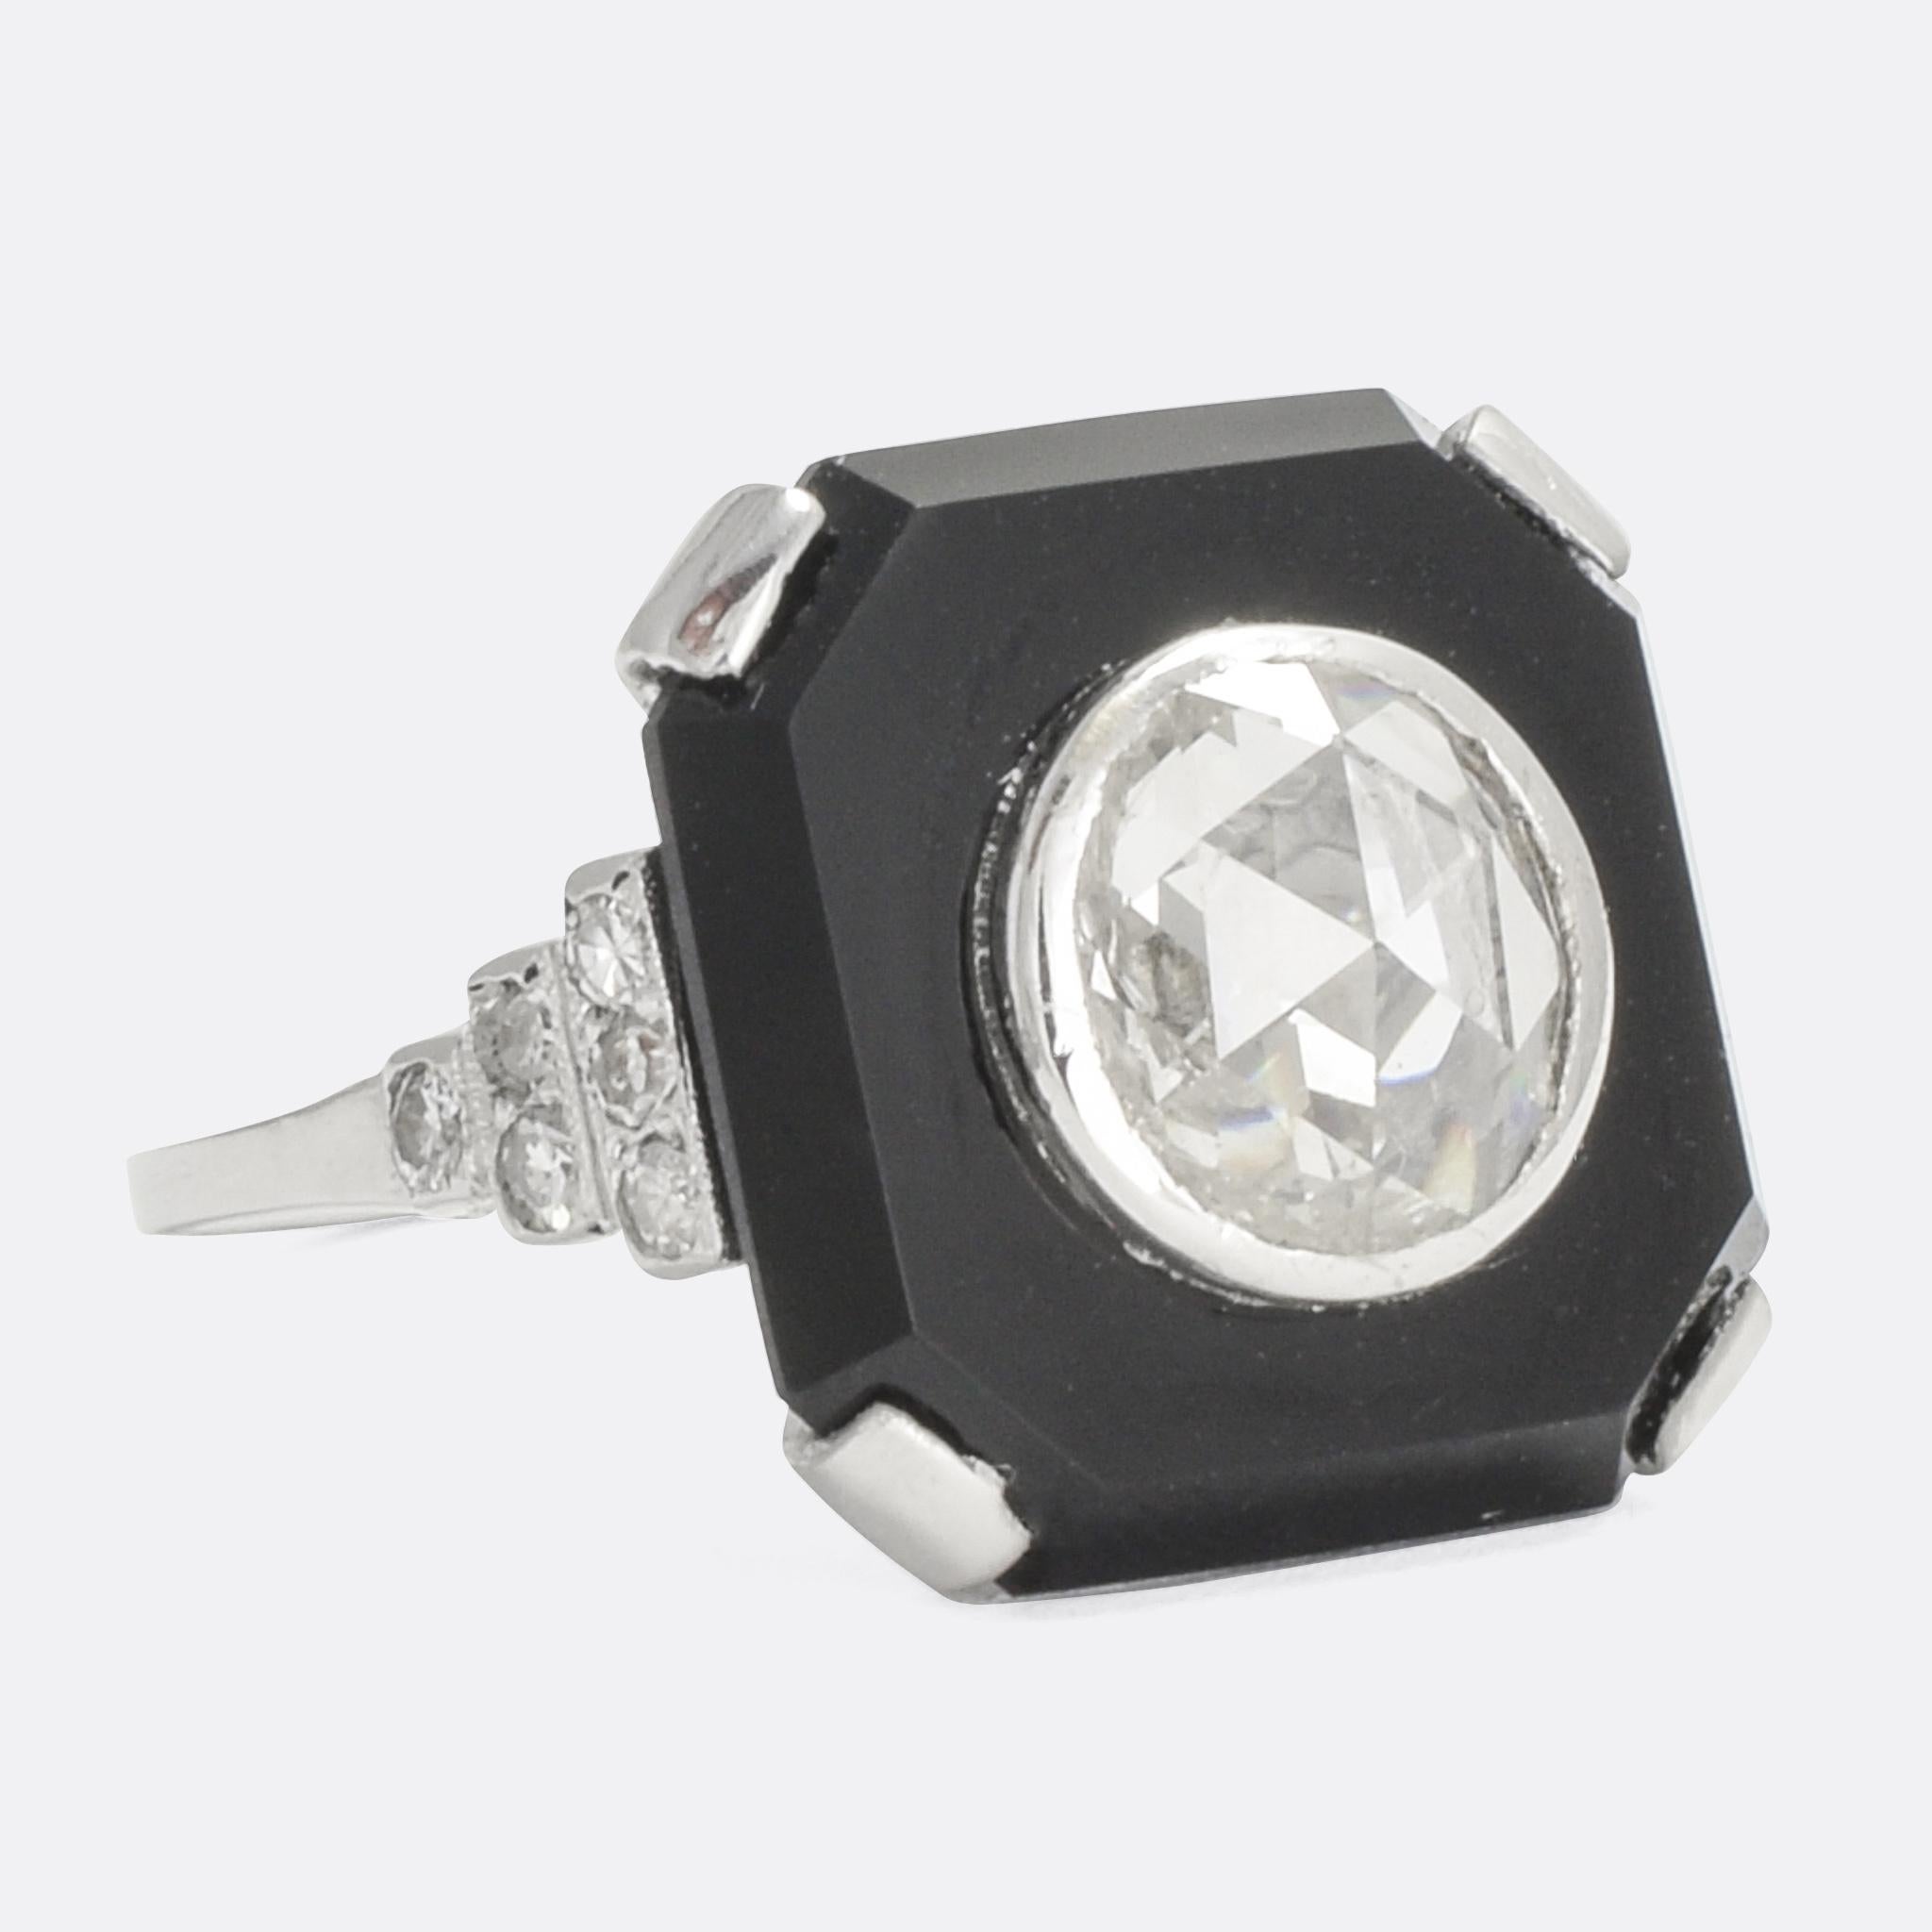 A stunning French Art Deco ring. The large domed rose cut diamond is set such that it appears to float within a black onyx slab. With stepped diamond shoulders and an openworked gallery complete the striking design. It's modelled in platinum